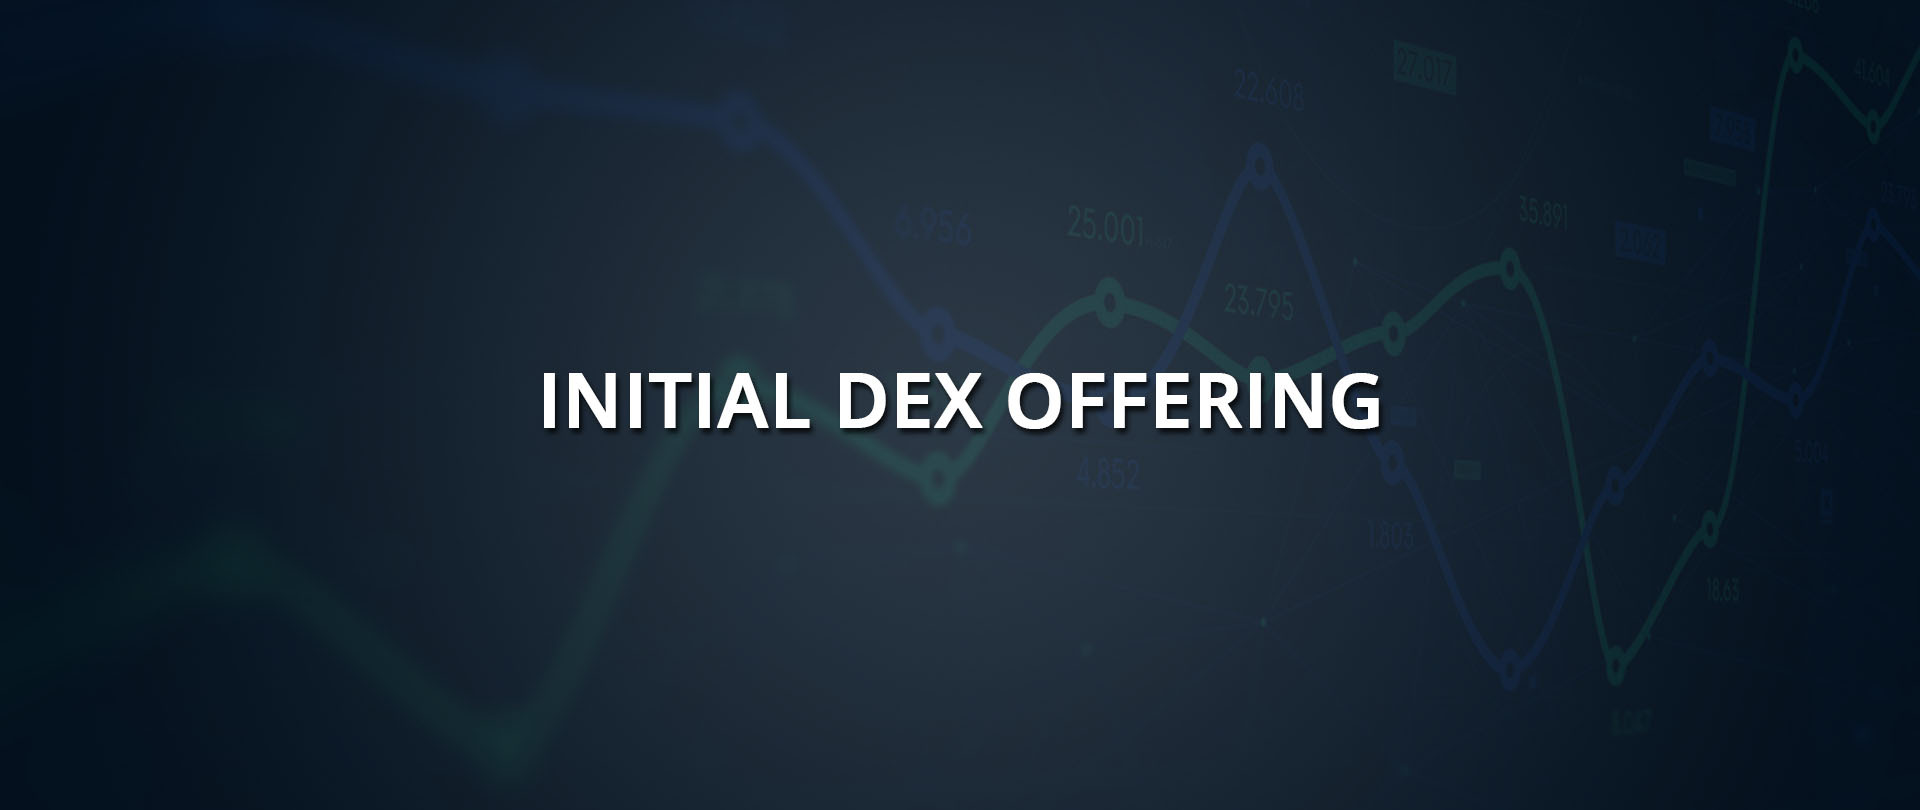 initial-dex-offering-ido-what-are-the-benefits-of-ido-model.jpg